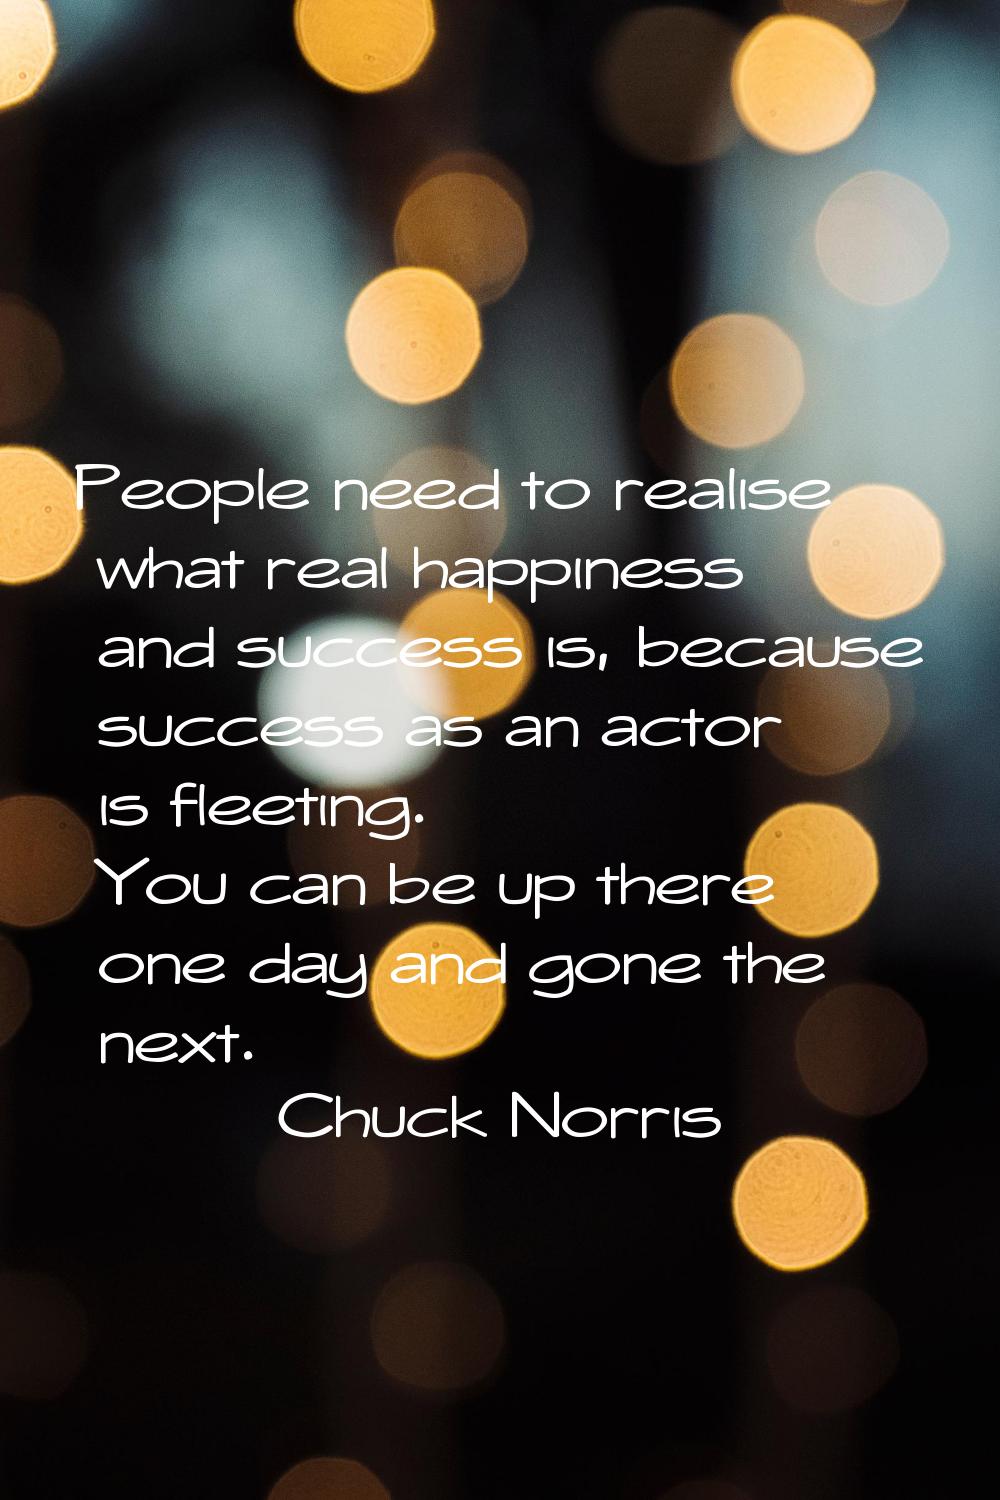 People need to realise what real happiness and success is, because success as an actor is fleeting.